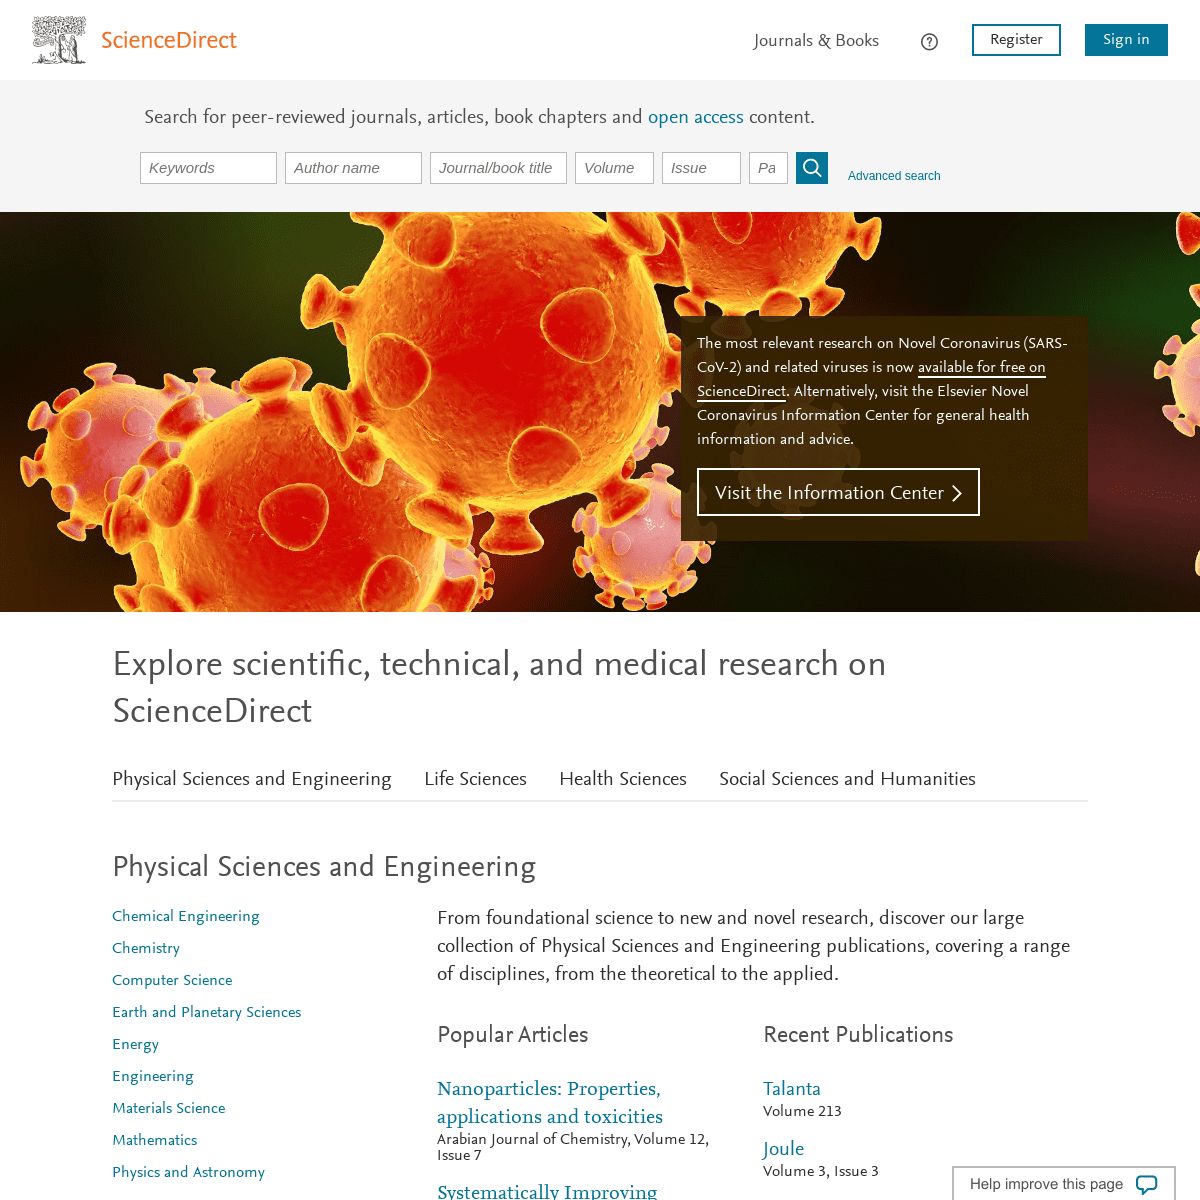 A complete backup of sciencedirect.com